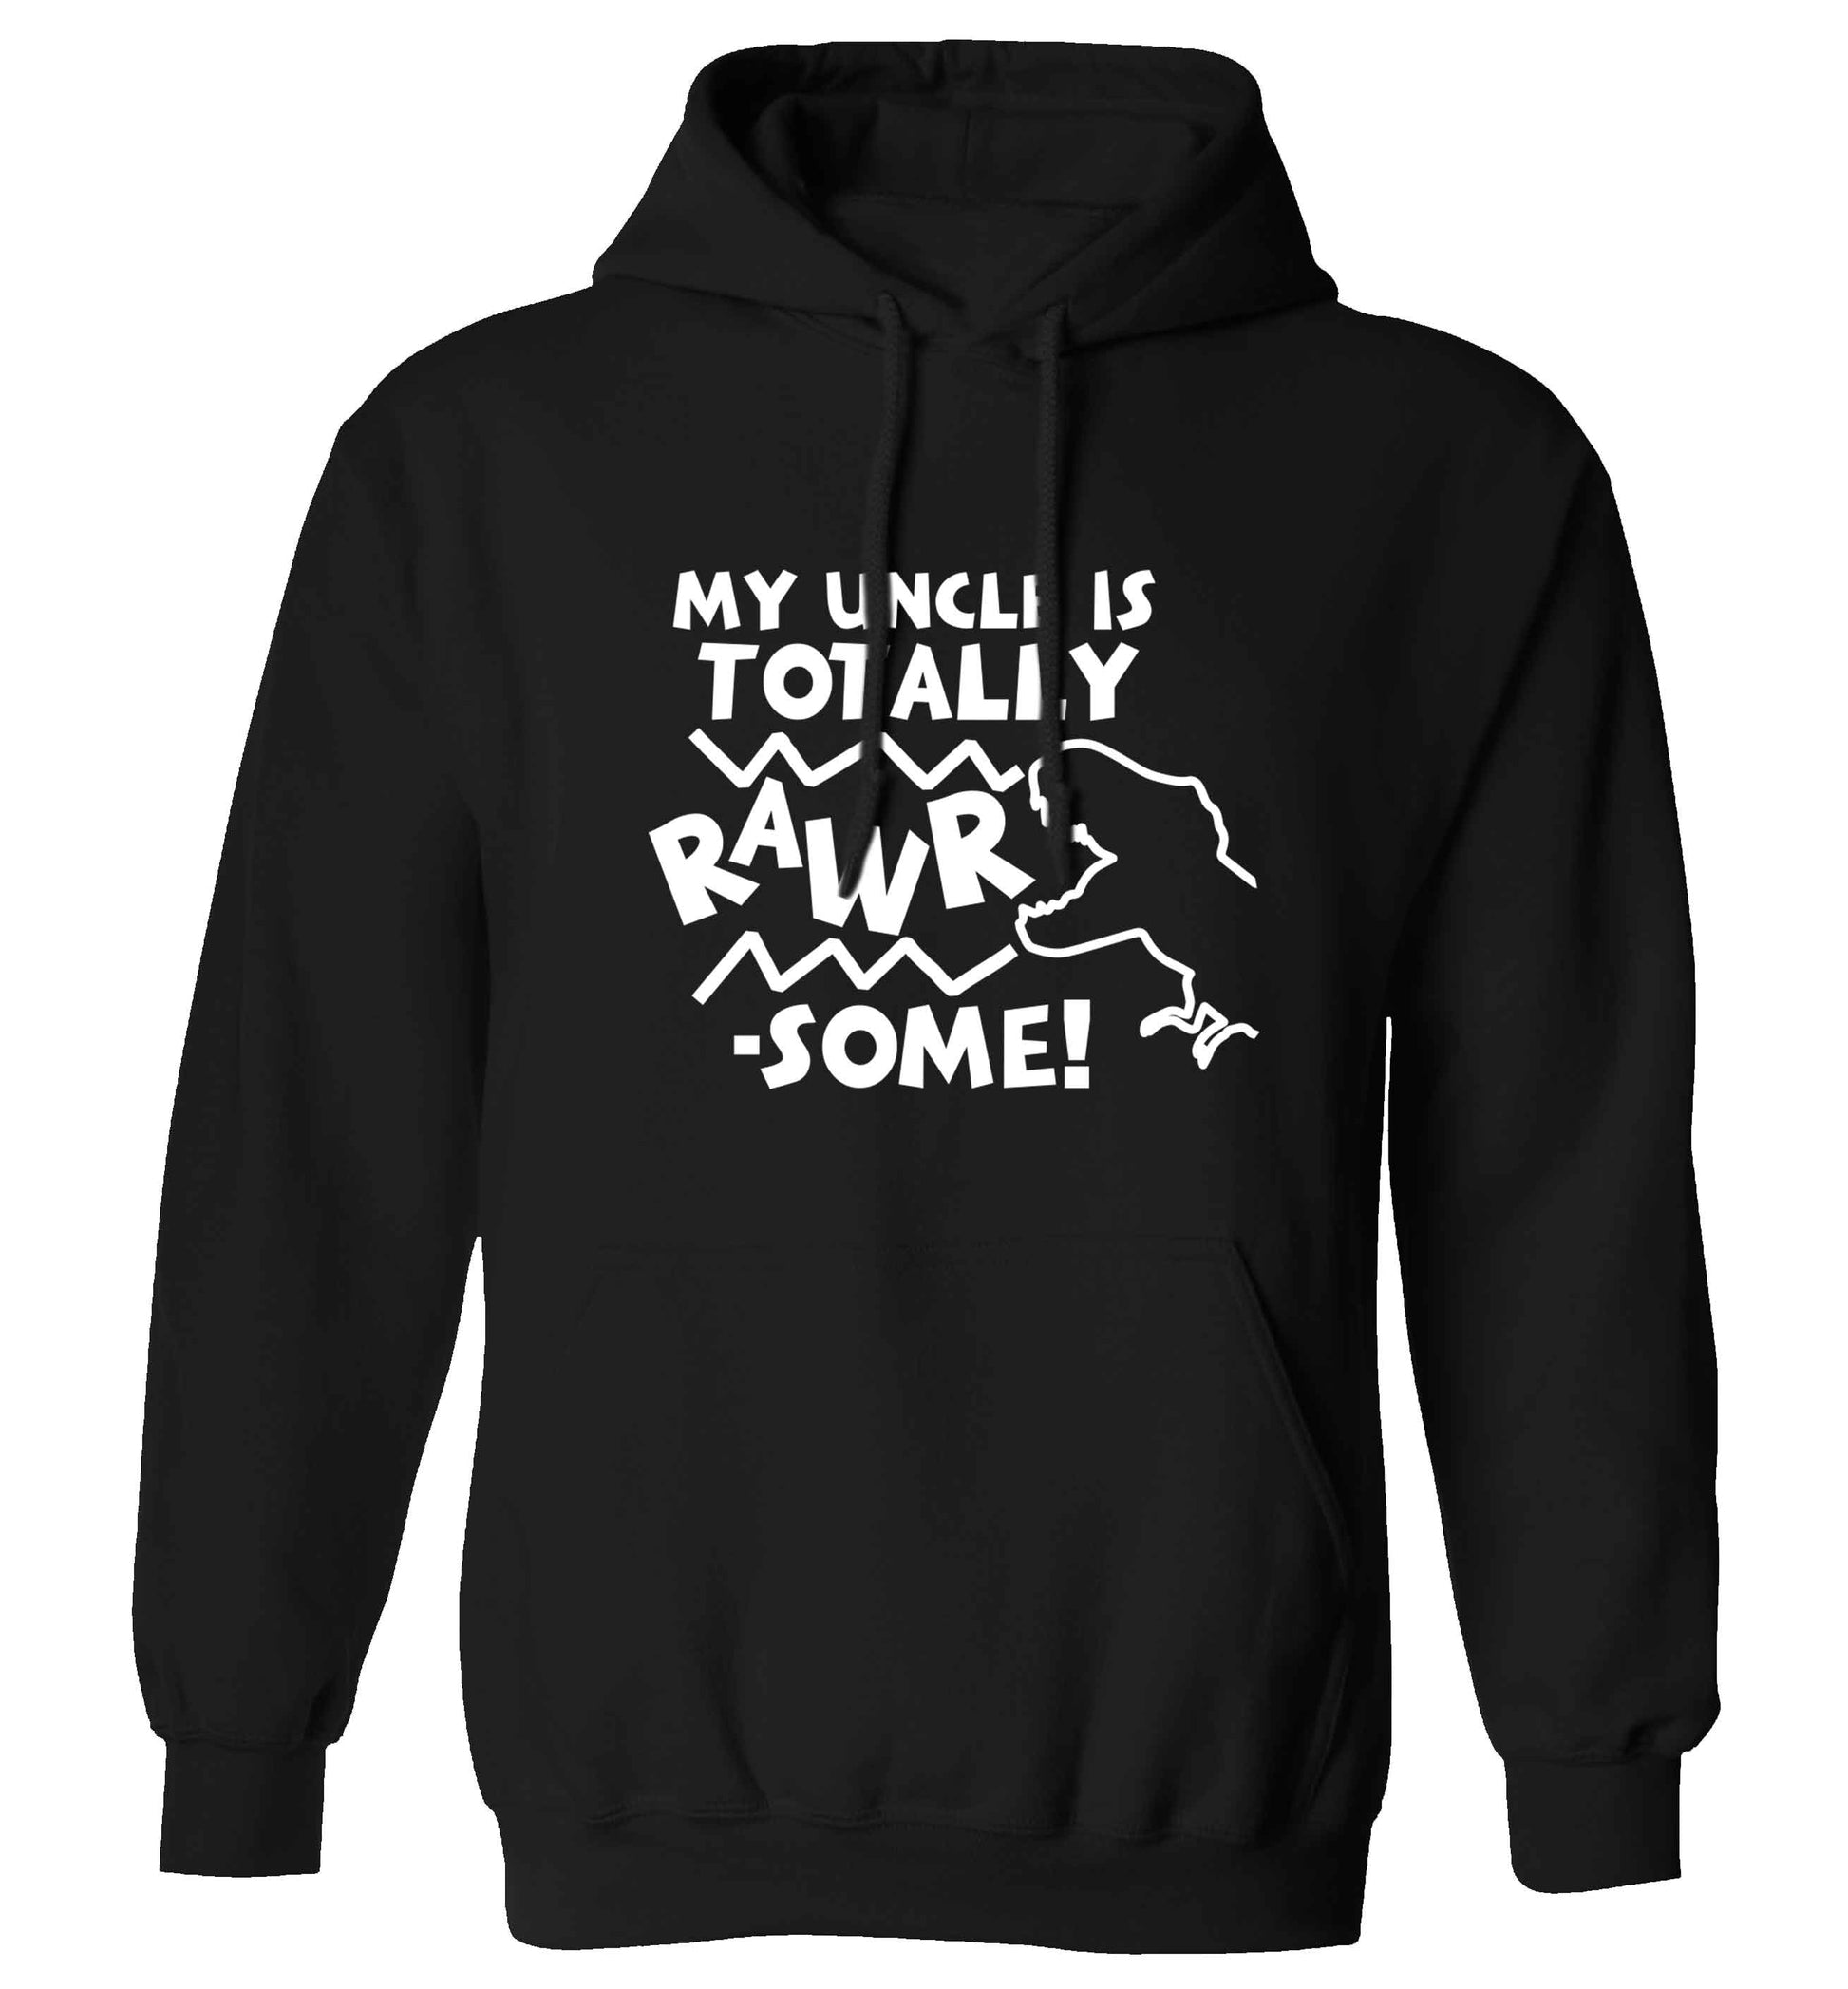 My uncle is totally rawrsome adults unisex black hoodie 2XL